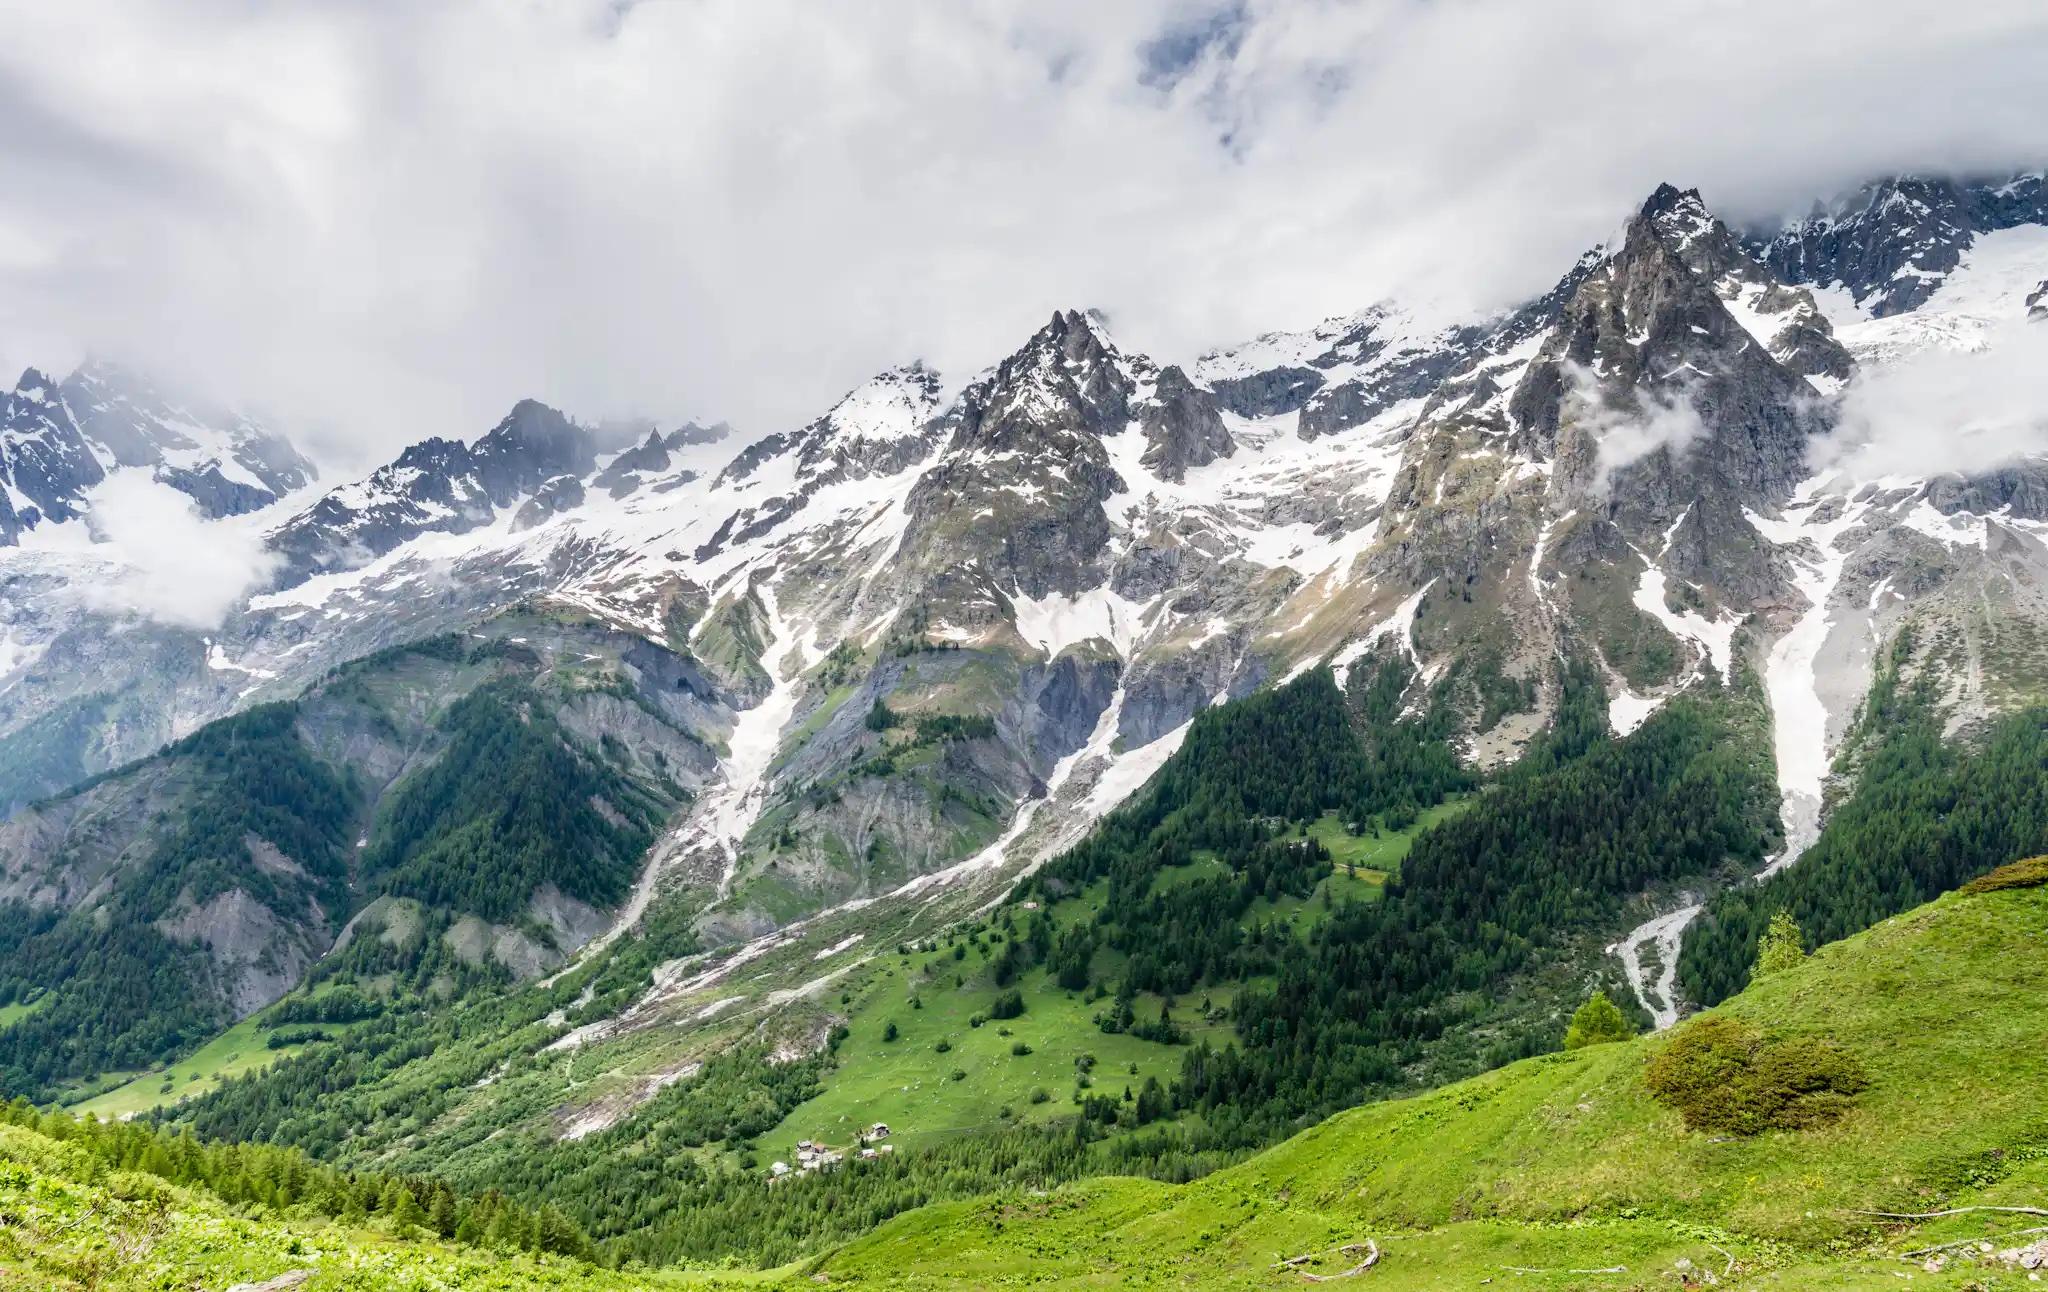 Views of the Mont Blanc Massif